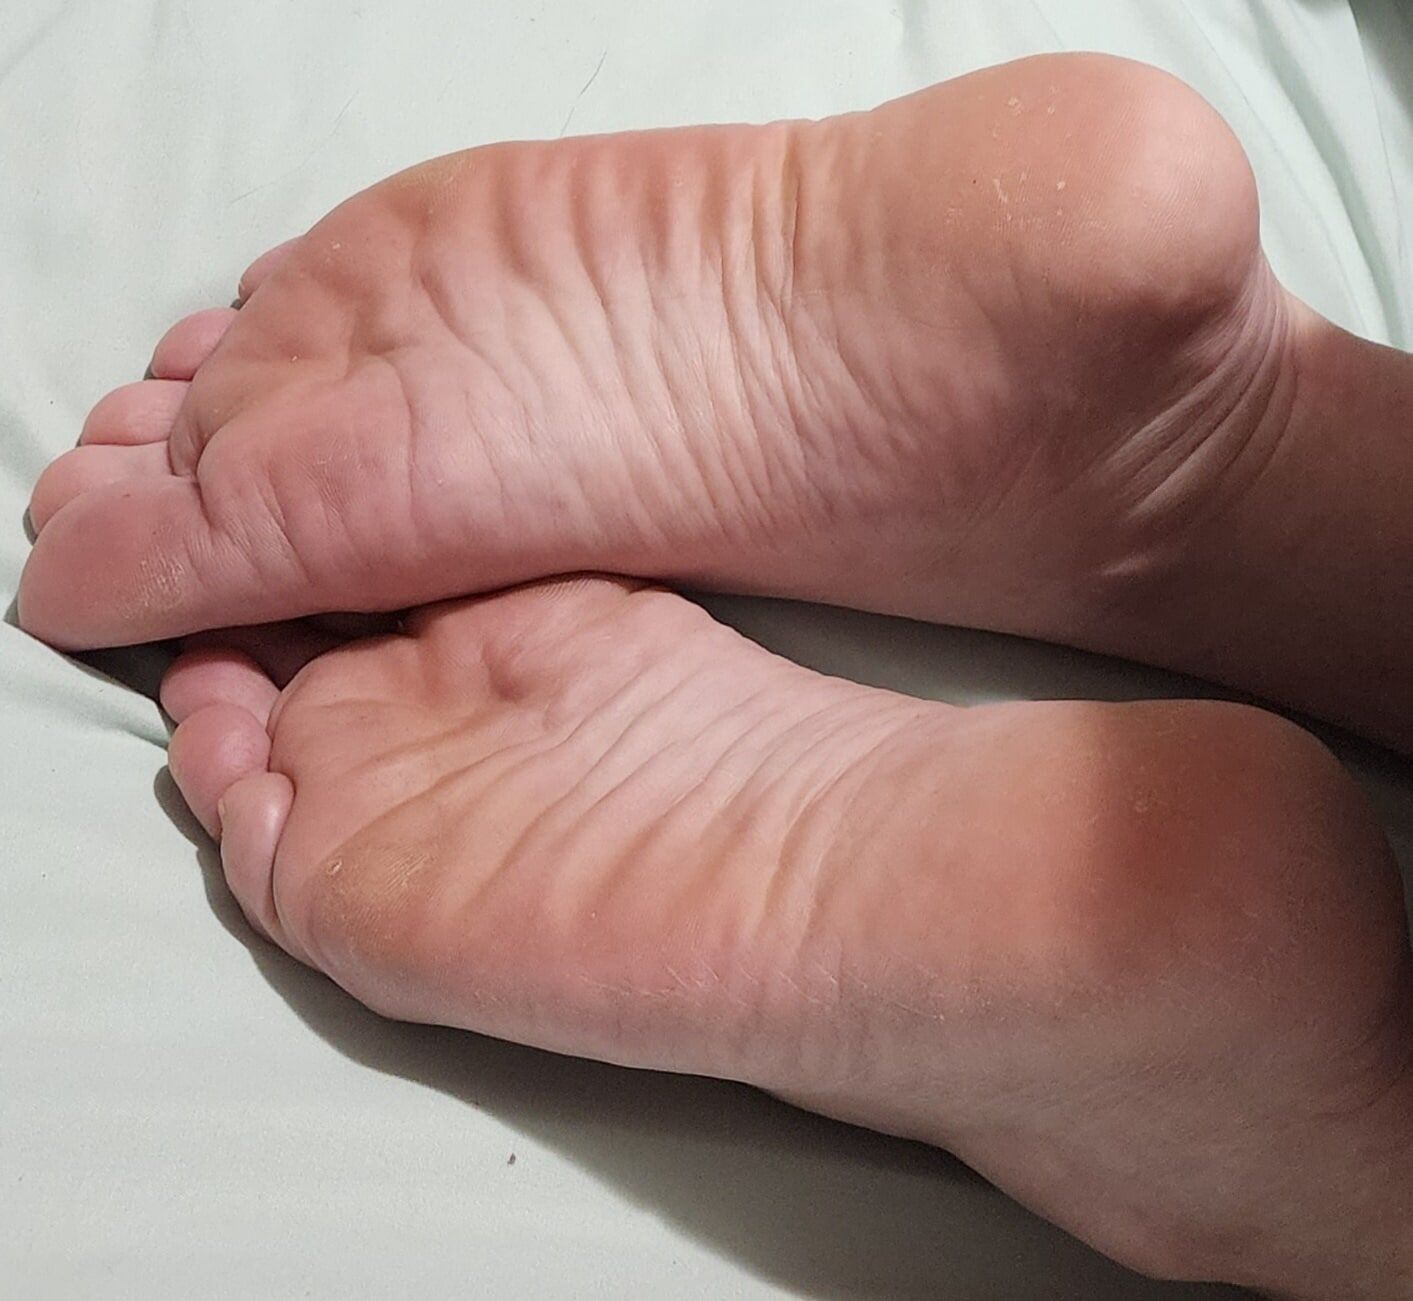 My feet for you that keep asking come fuck my feet please